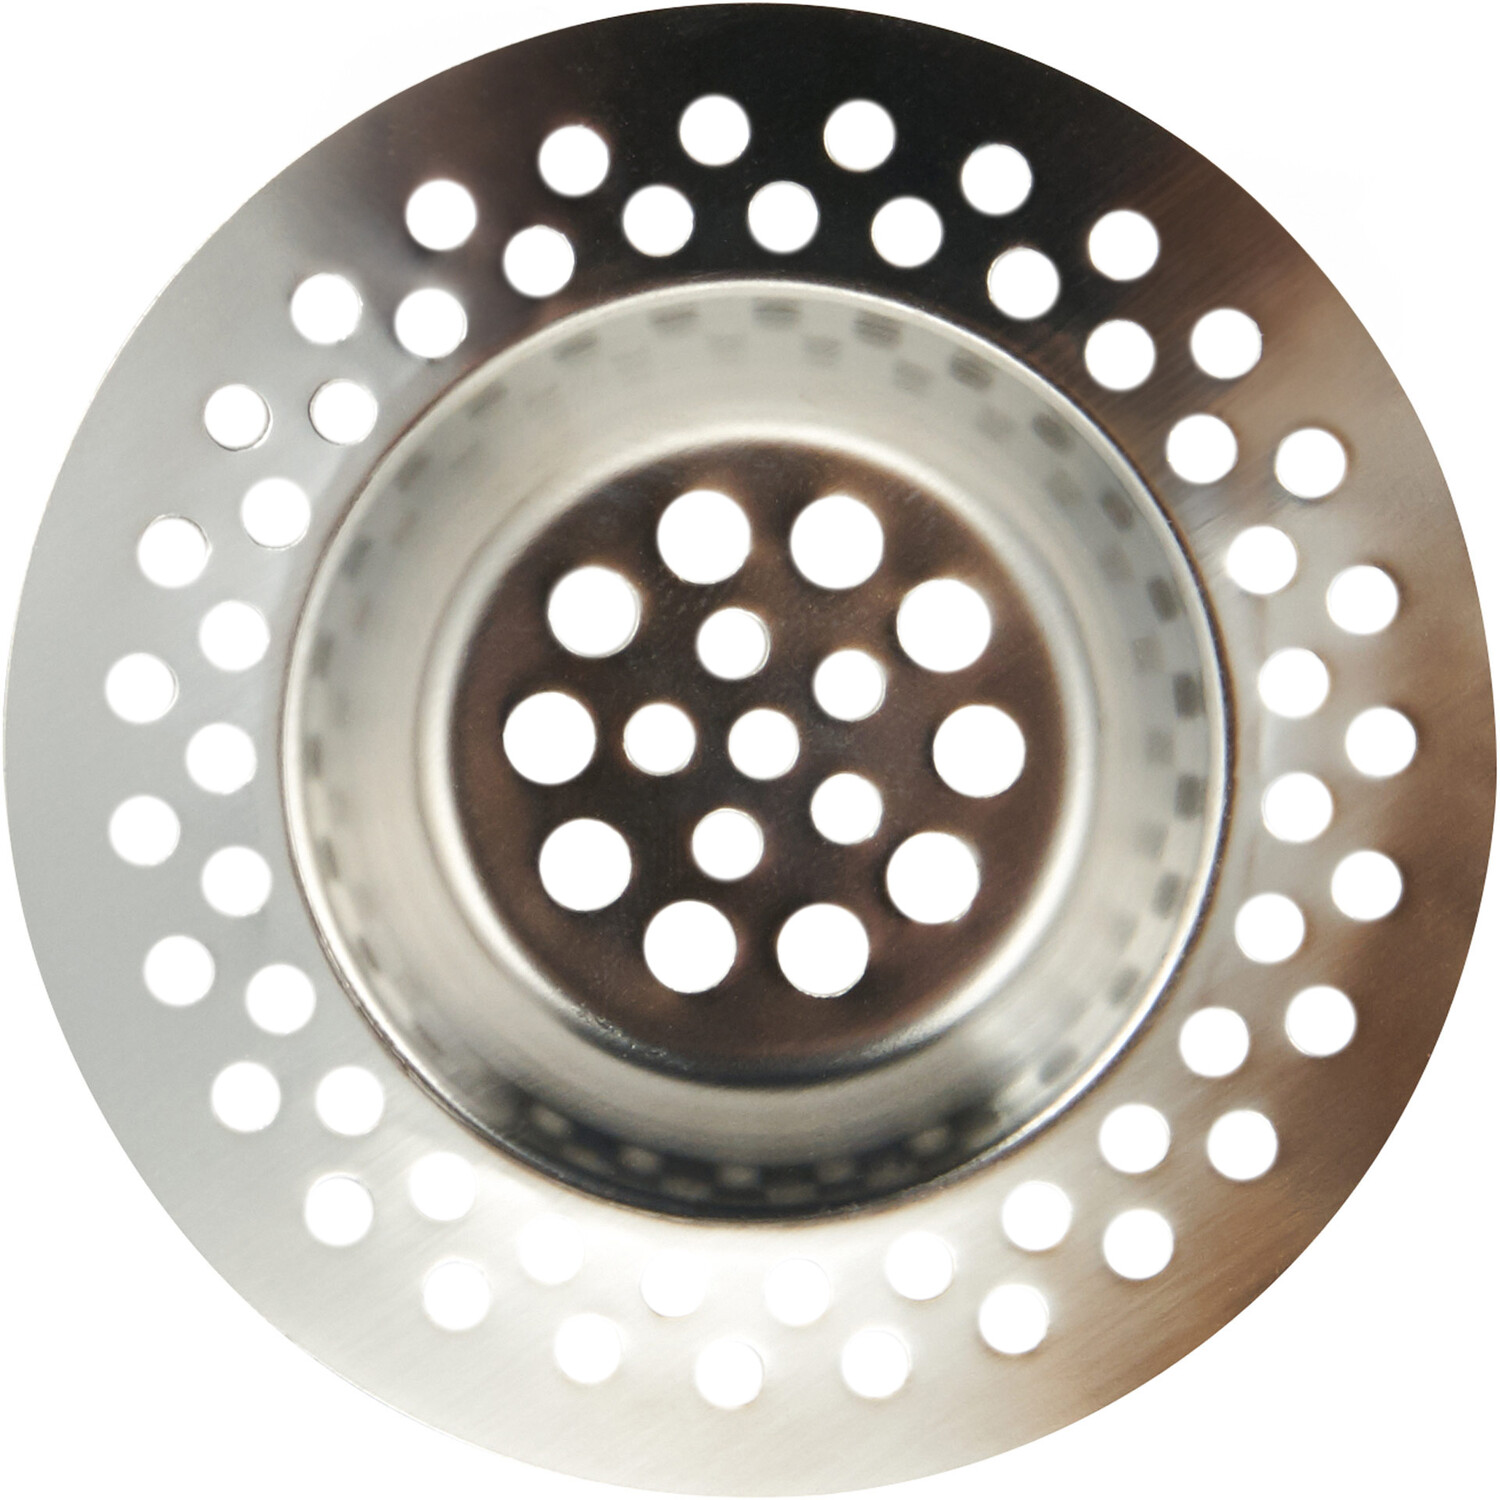 My Home Silver Sink Strainer Image 4